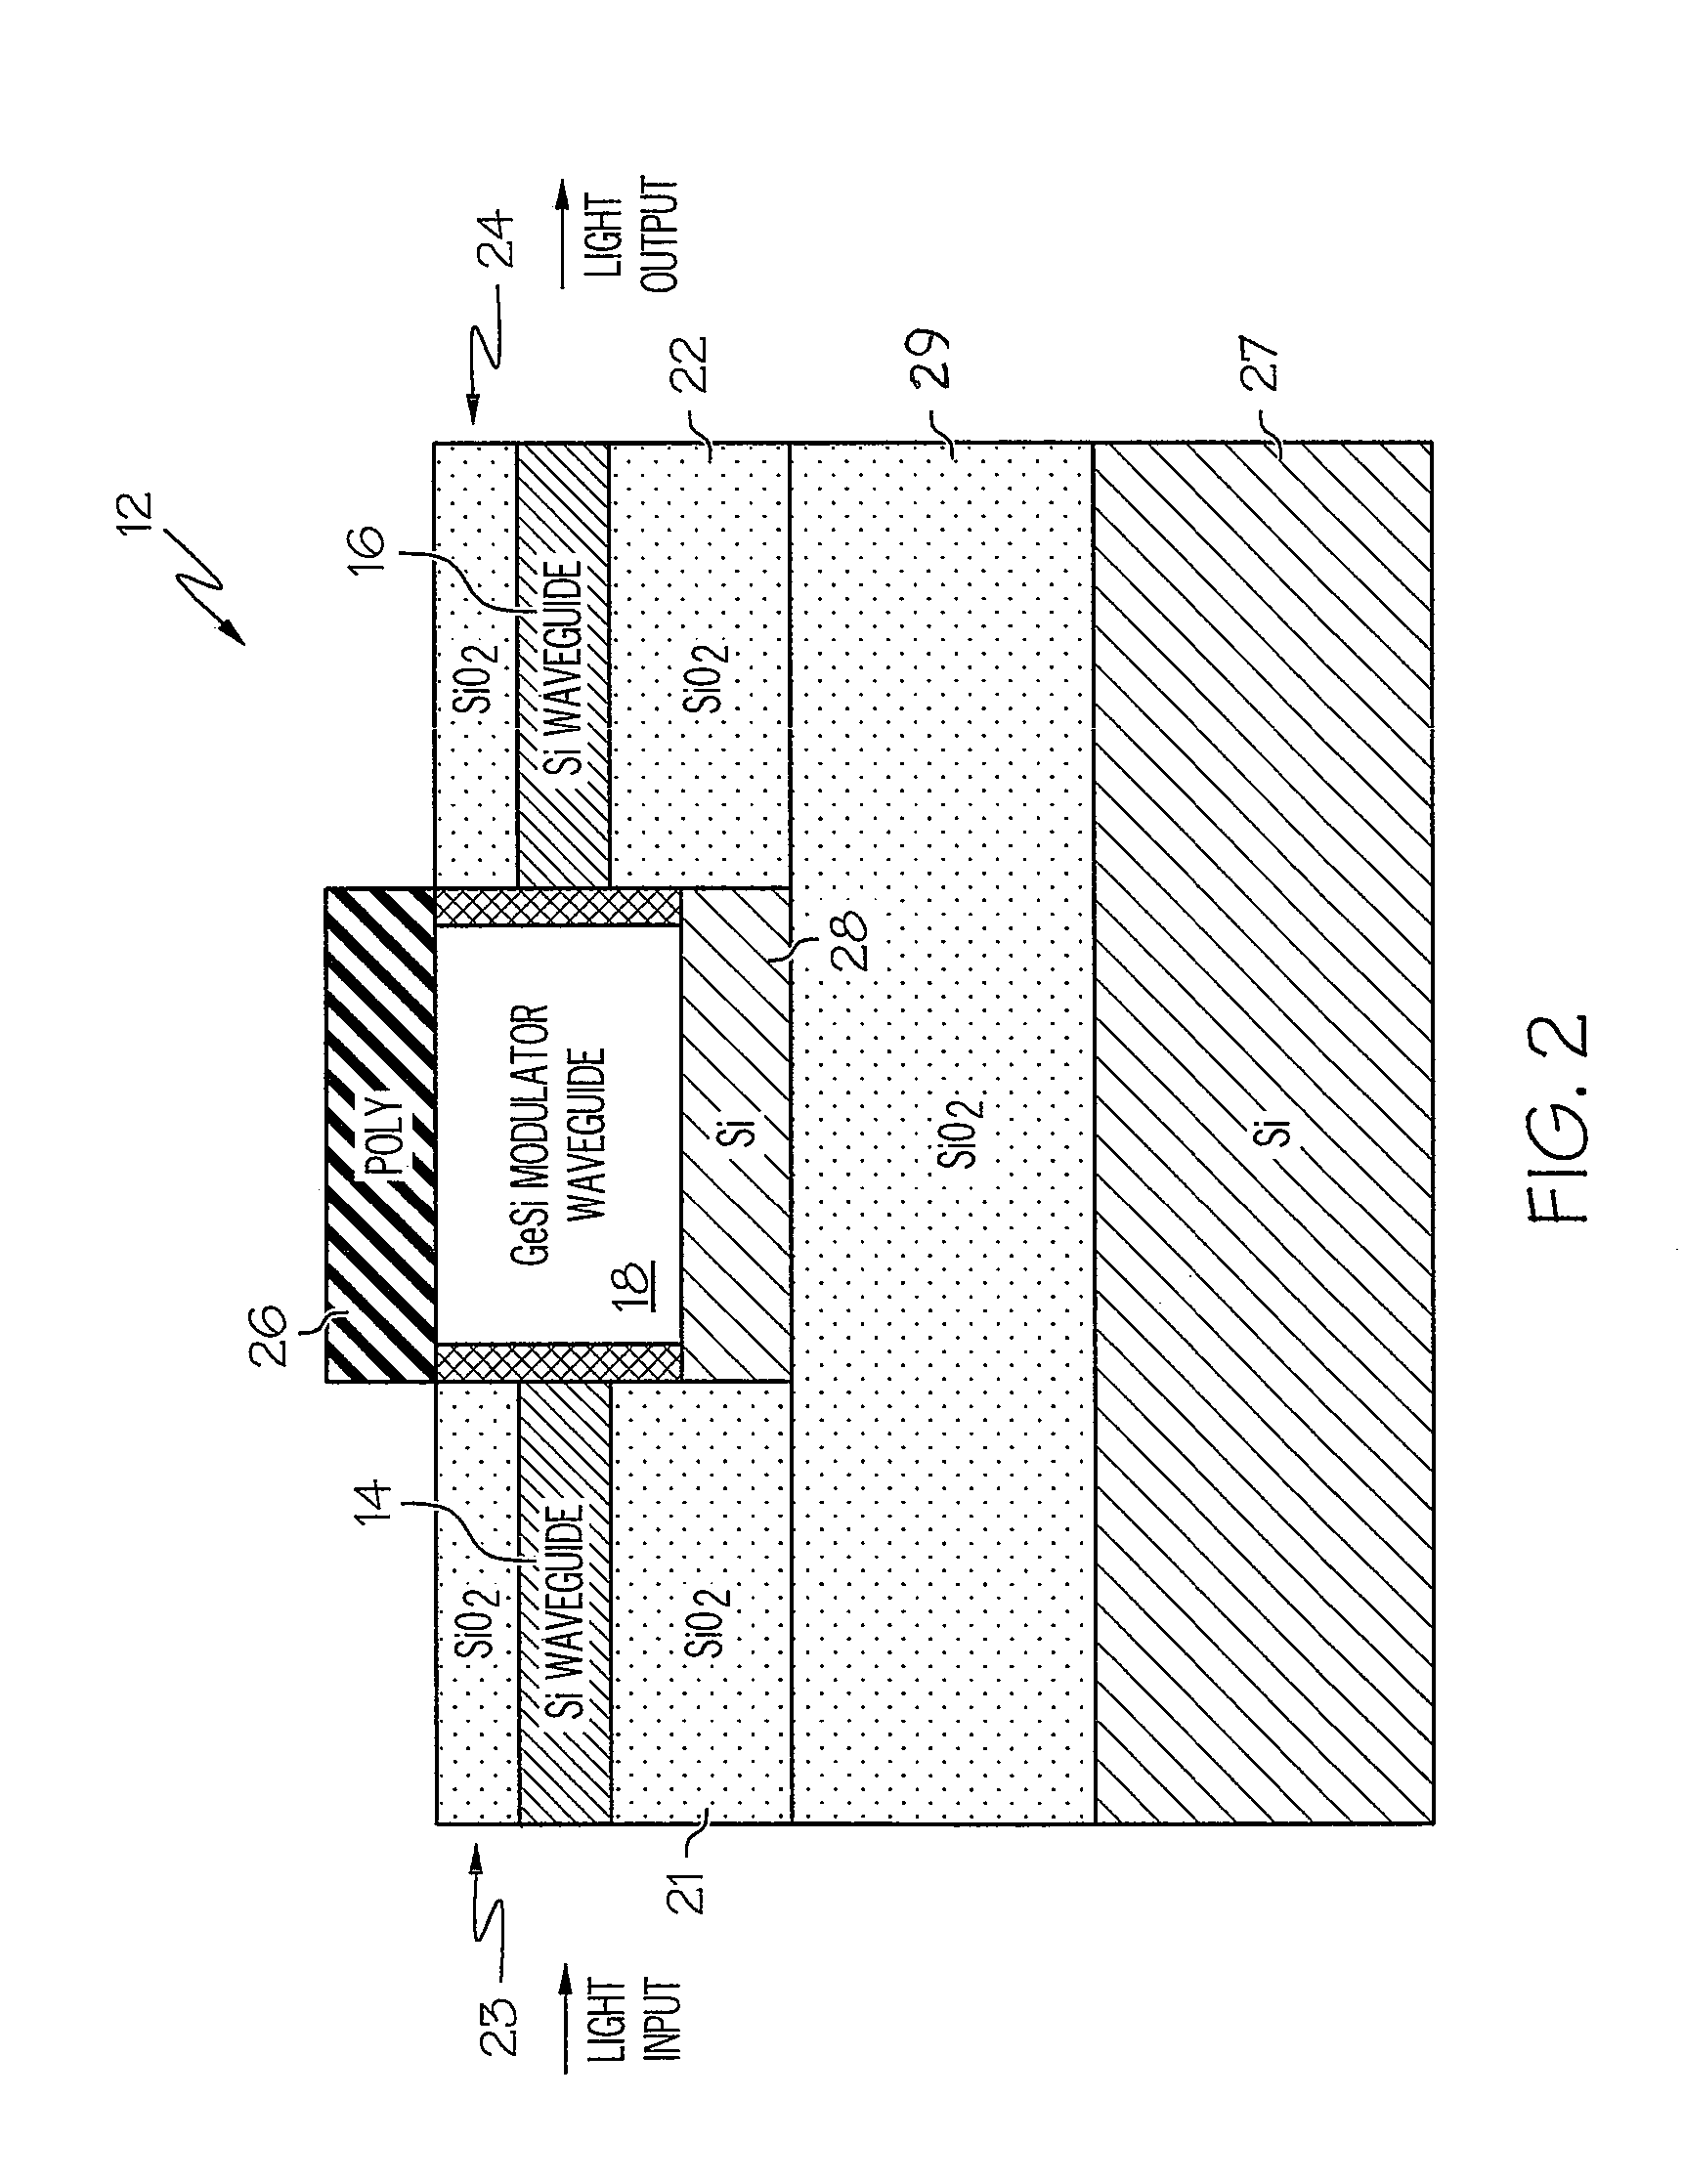 Method for Fabricating Butt-Coupled Electro-Absorptive Modulators